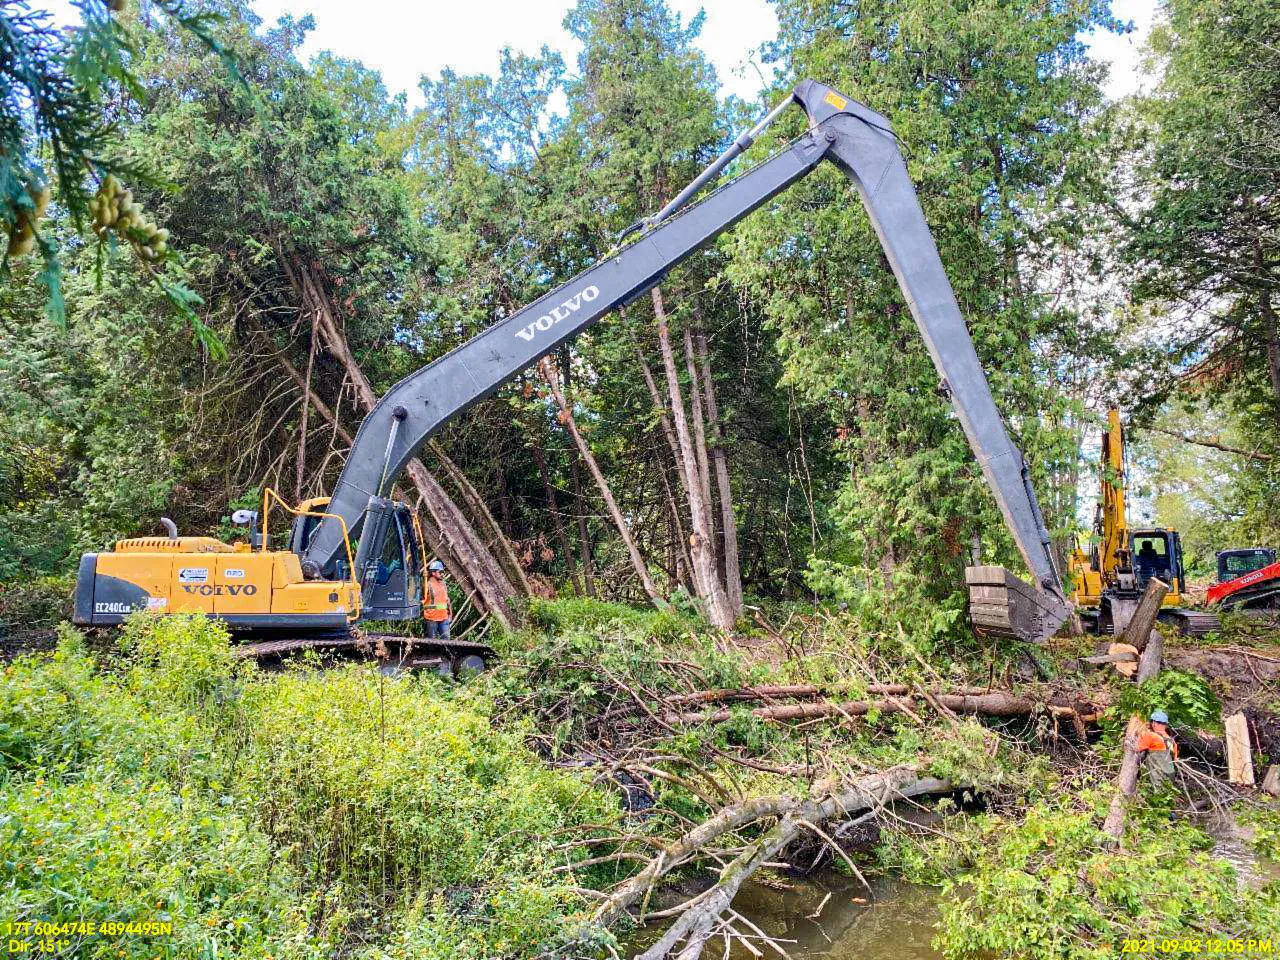 Excavator moving trees into place along river bank